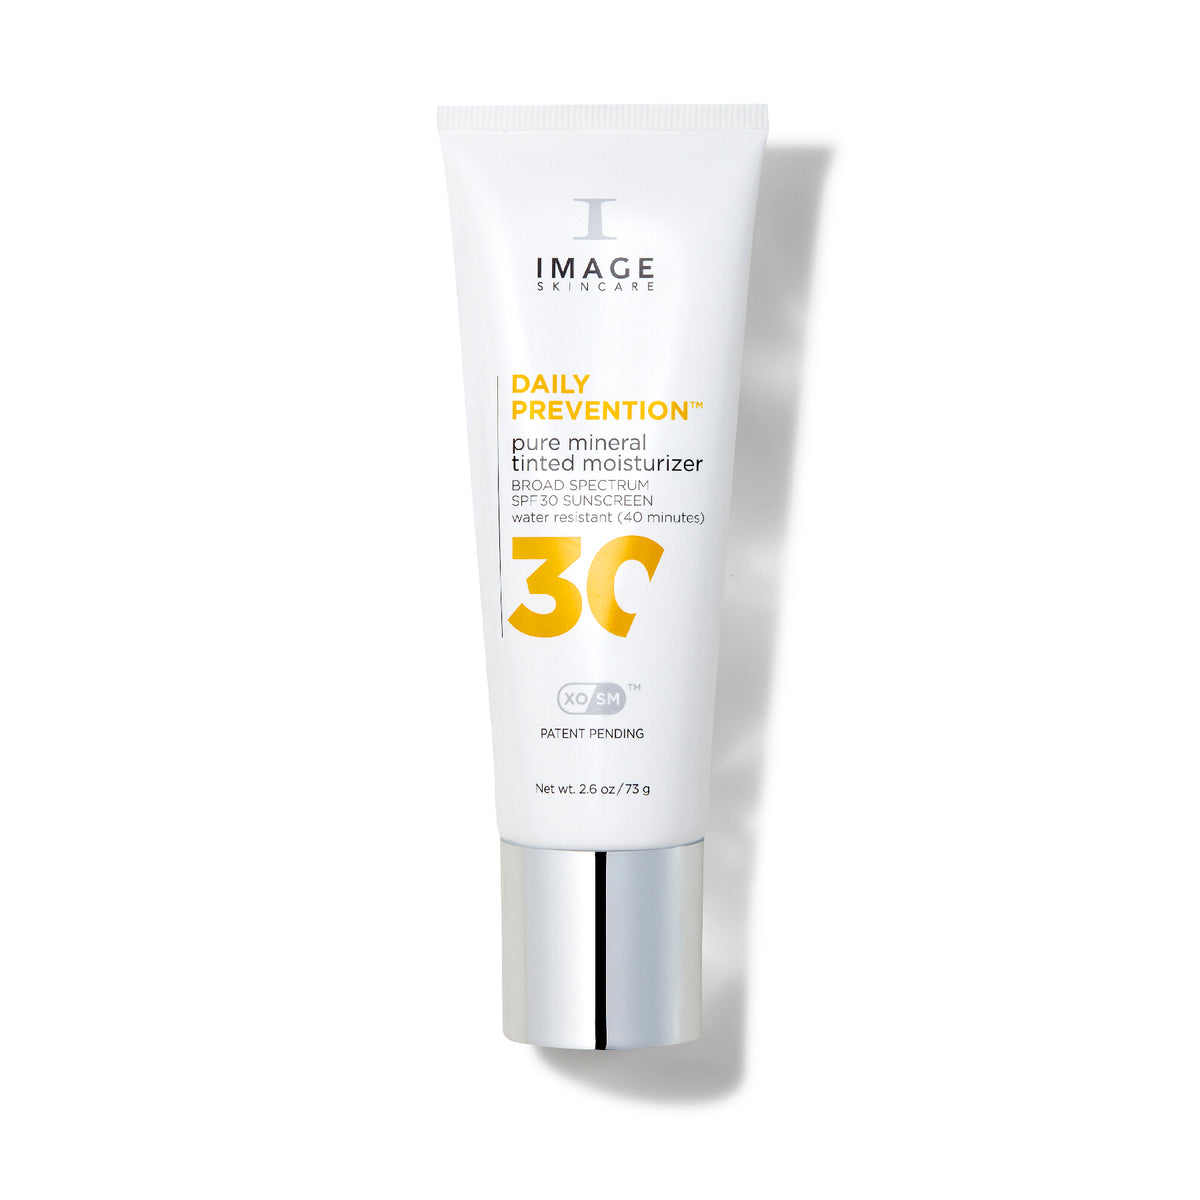 Image Skincare -  DAILY PREVENTION™ Pure Mineral Tinted Moisturizer SPF30 (2.6oz)